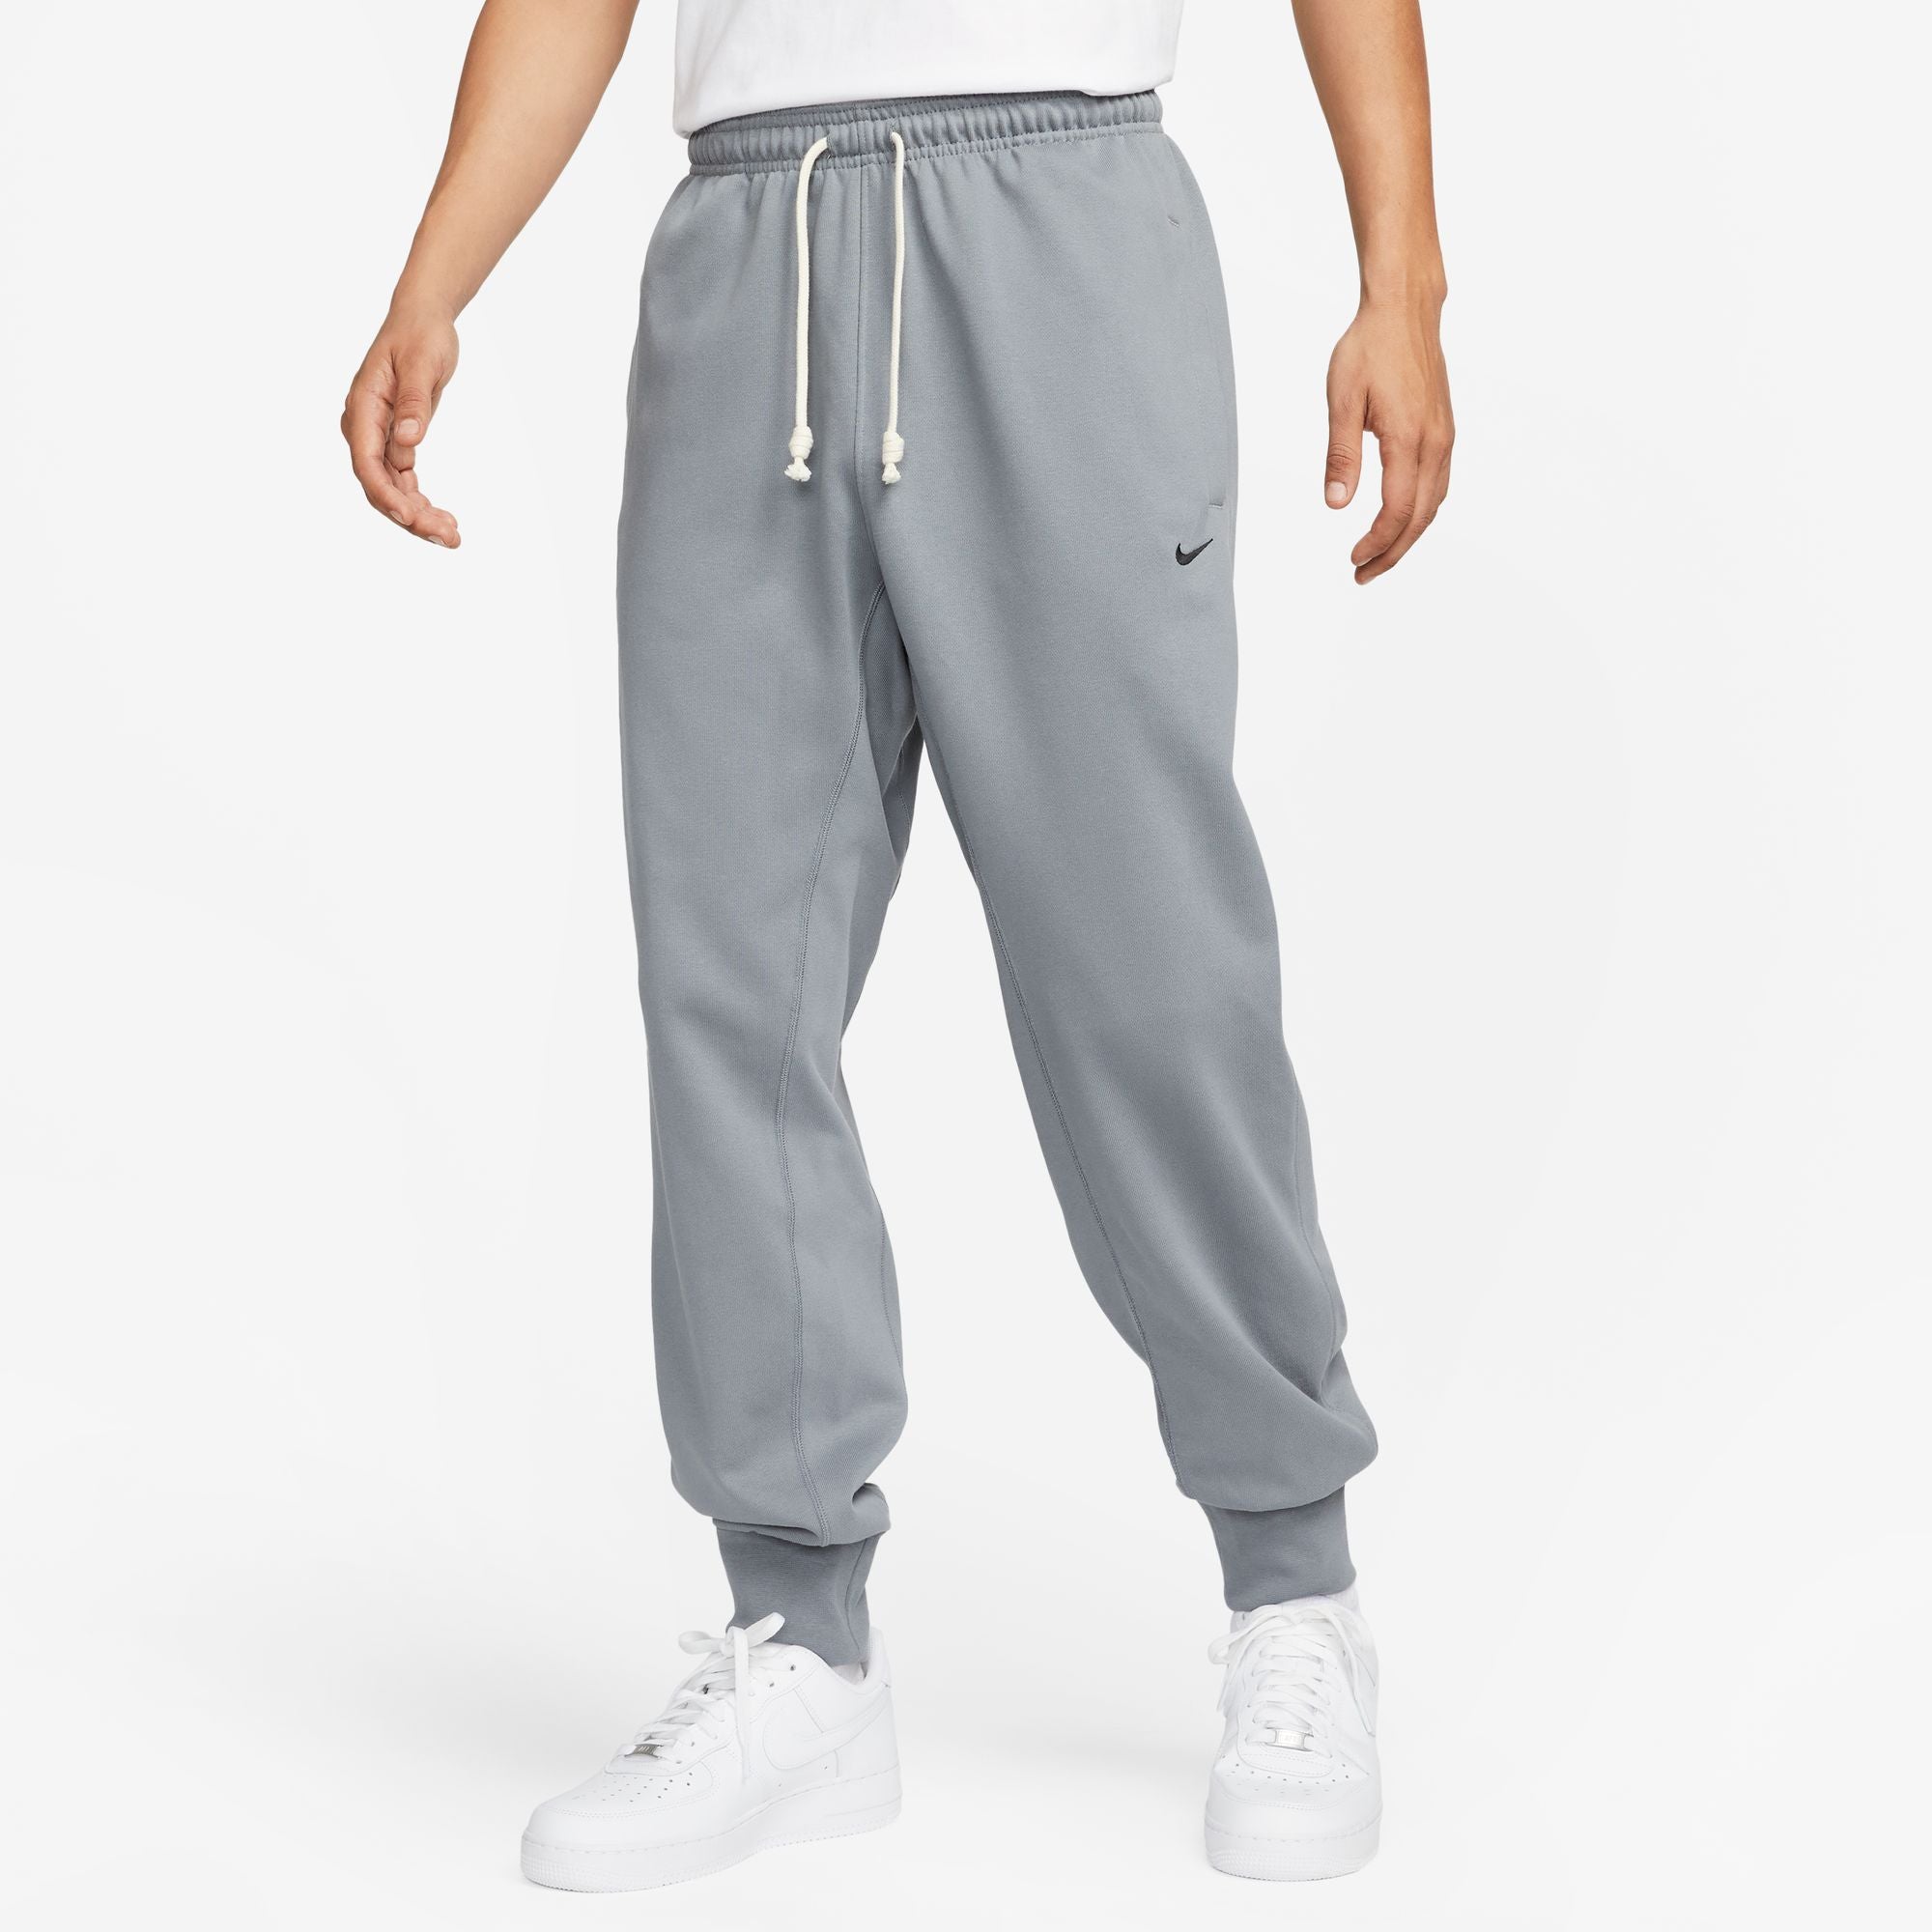 Nike Standard Issue Culture of Football Dri-FIT Jogger Pants